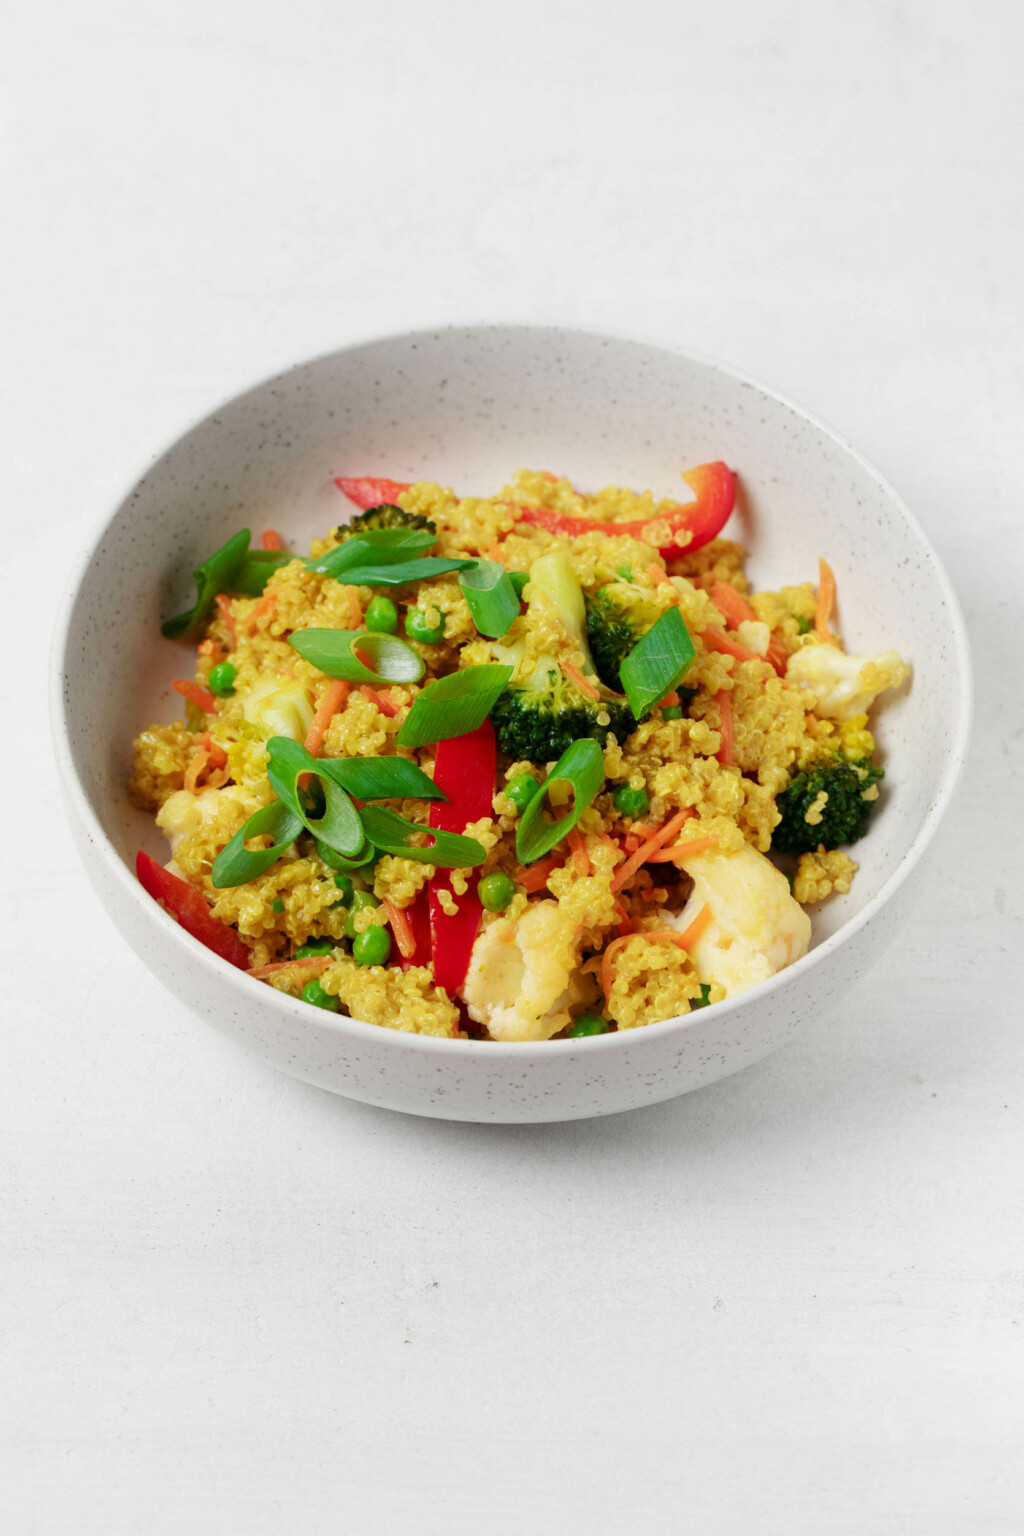 A round, white bowl holds a golden mixture of quinoa and vegetables, which has been topped with green onions and pieces of chopped cashew nuts.